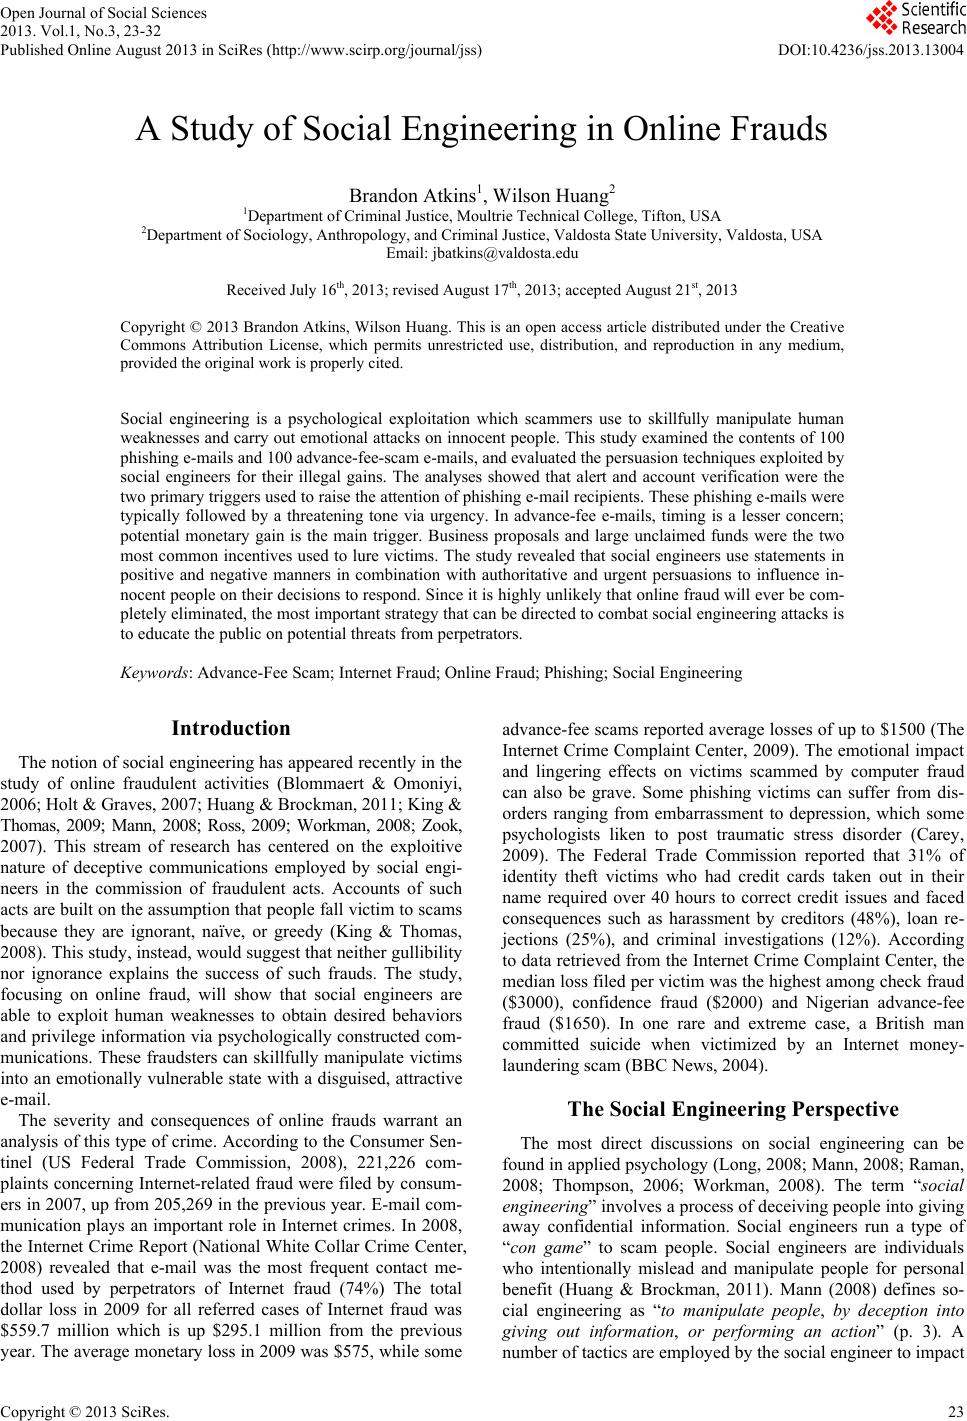 social engineering research papers